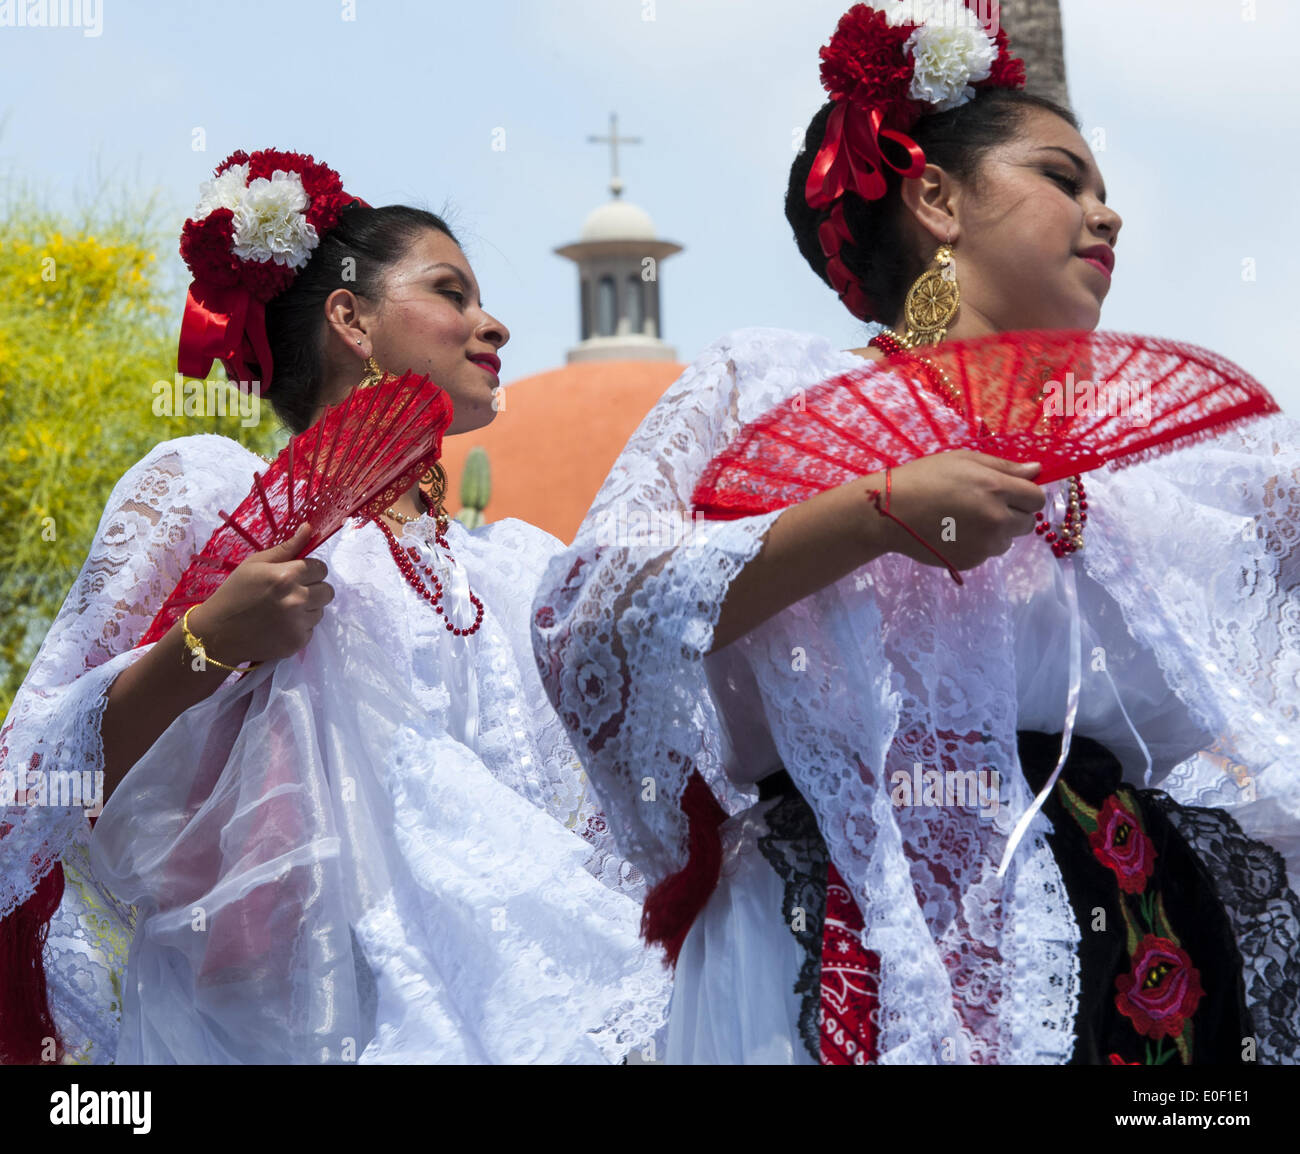 San Juan Capistrano, California, USA. 10th May, 2014. Dancers with the Ballet Folklorico de San Juan Capistrano performed various regional dances on Saturday at the 10th Annual 2014 Battle of the Mariachi at Mission San Juan Capistrano in San Juan Capistrano. The 10th Annual 2014 Battle of the Mariachi kicked off at Mission San Juan Capistrano in San San Juan Capistrano on Saturday, featuring Mariachis from around Southern California competing for top honors and prizes***ALT CAPTION****Mission San Juan Capistrano hosted the 10th Annual 2014 Battle of the Mariachis on Saturday in San Juan Capi Stock Photo